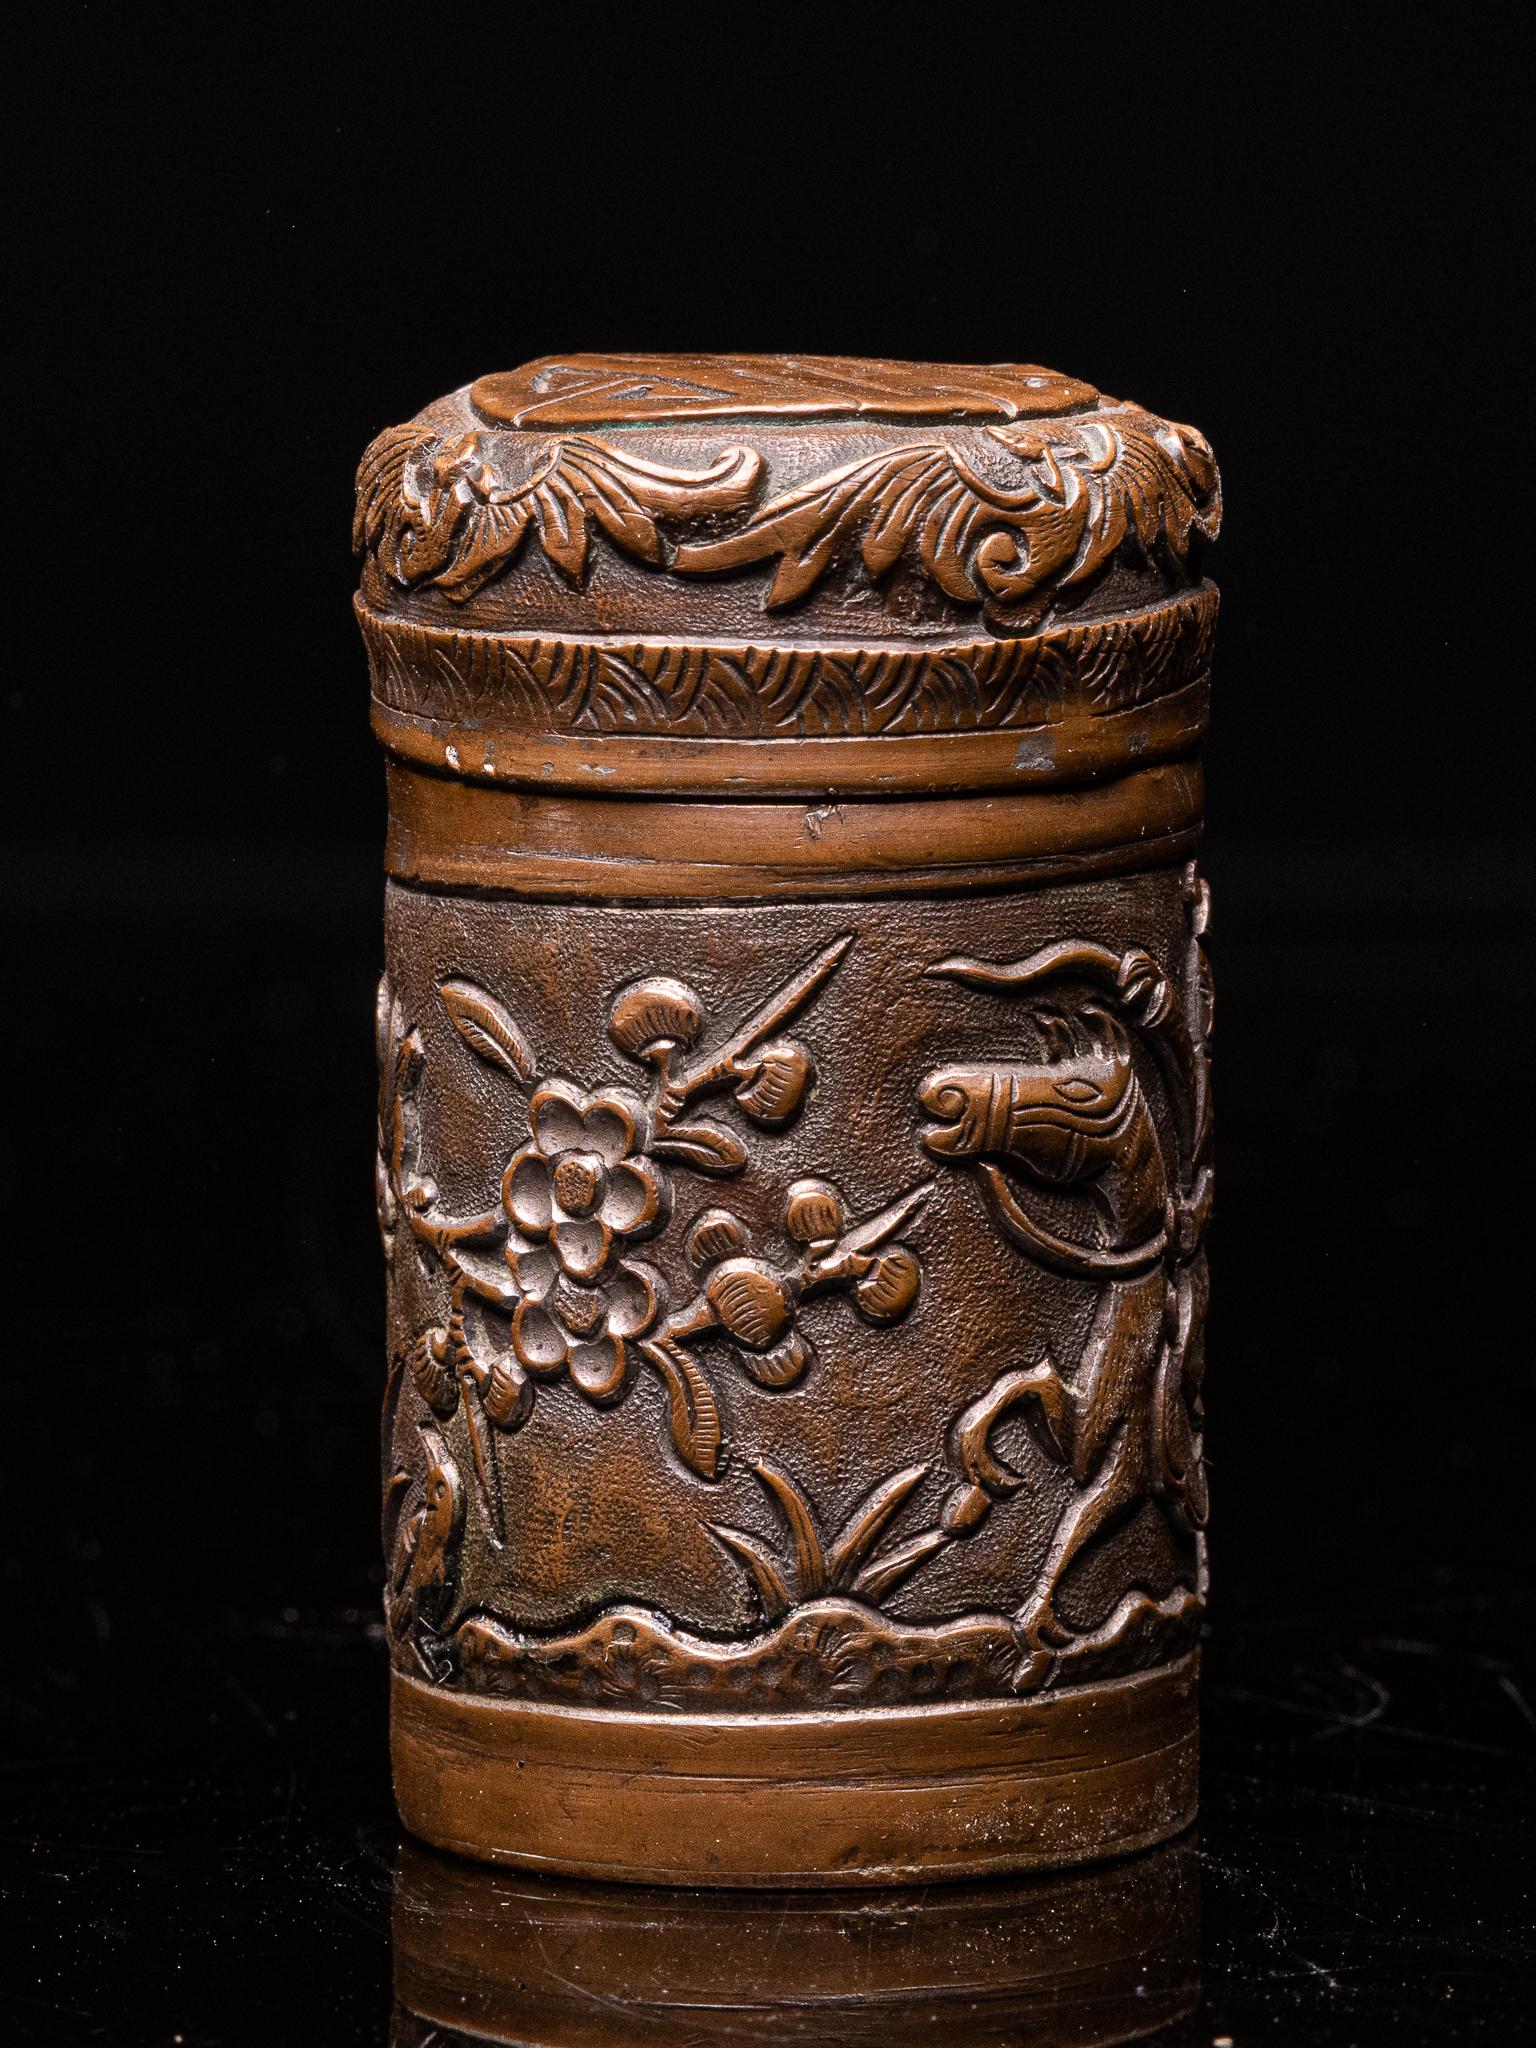 Antique Chinese Opium Box in Hammered Brass, Decorated with a Scene of a Rider For Sale 1